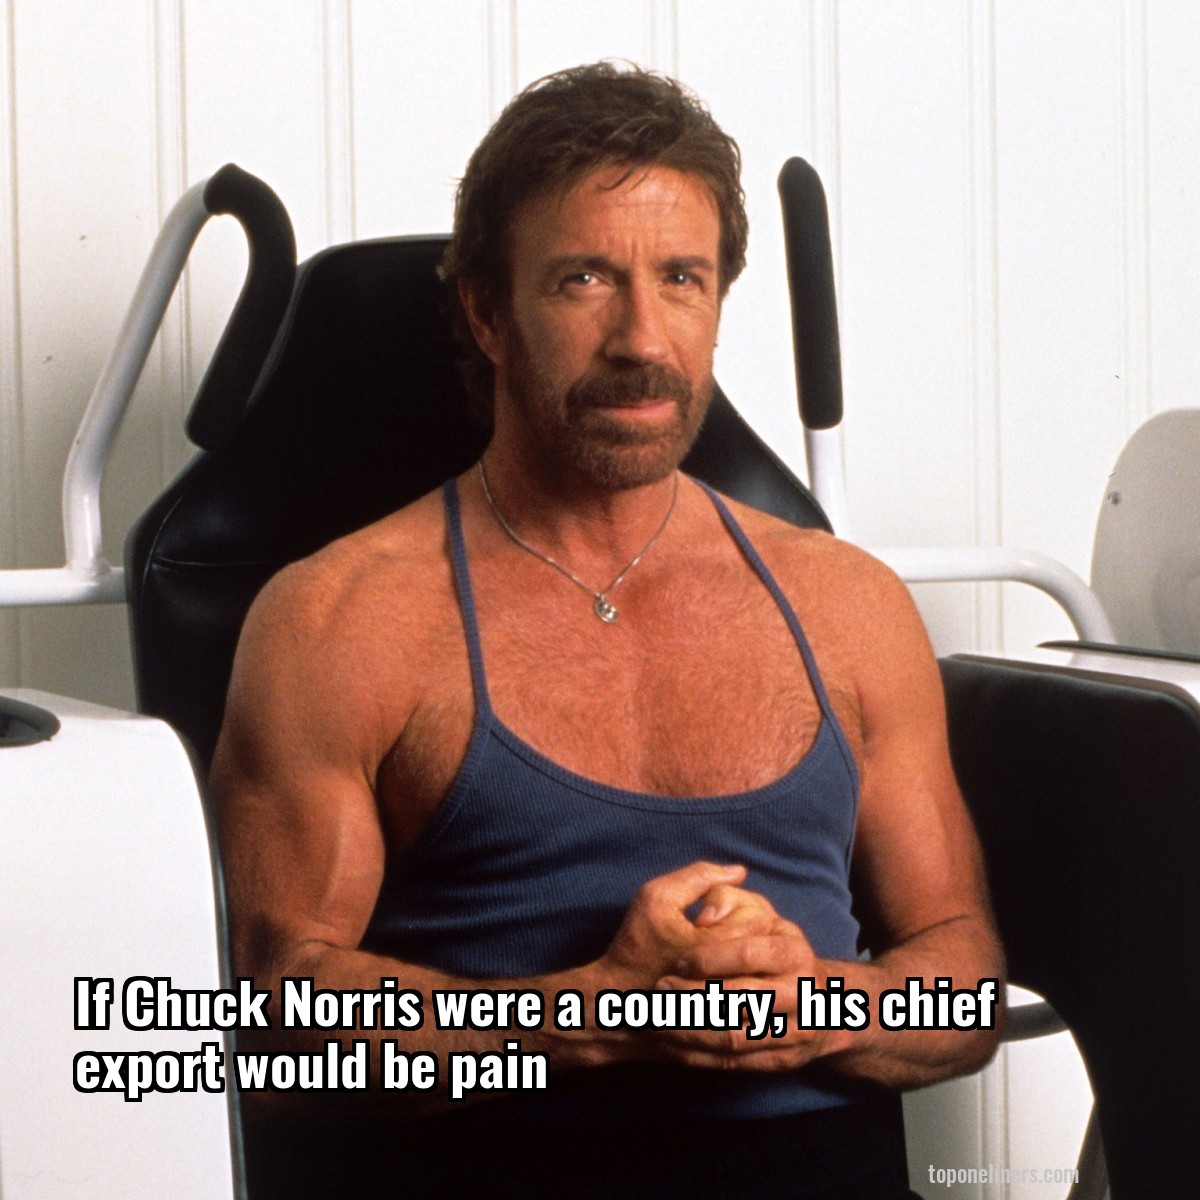 If Chuck Norris were a country, his chief export would be pain